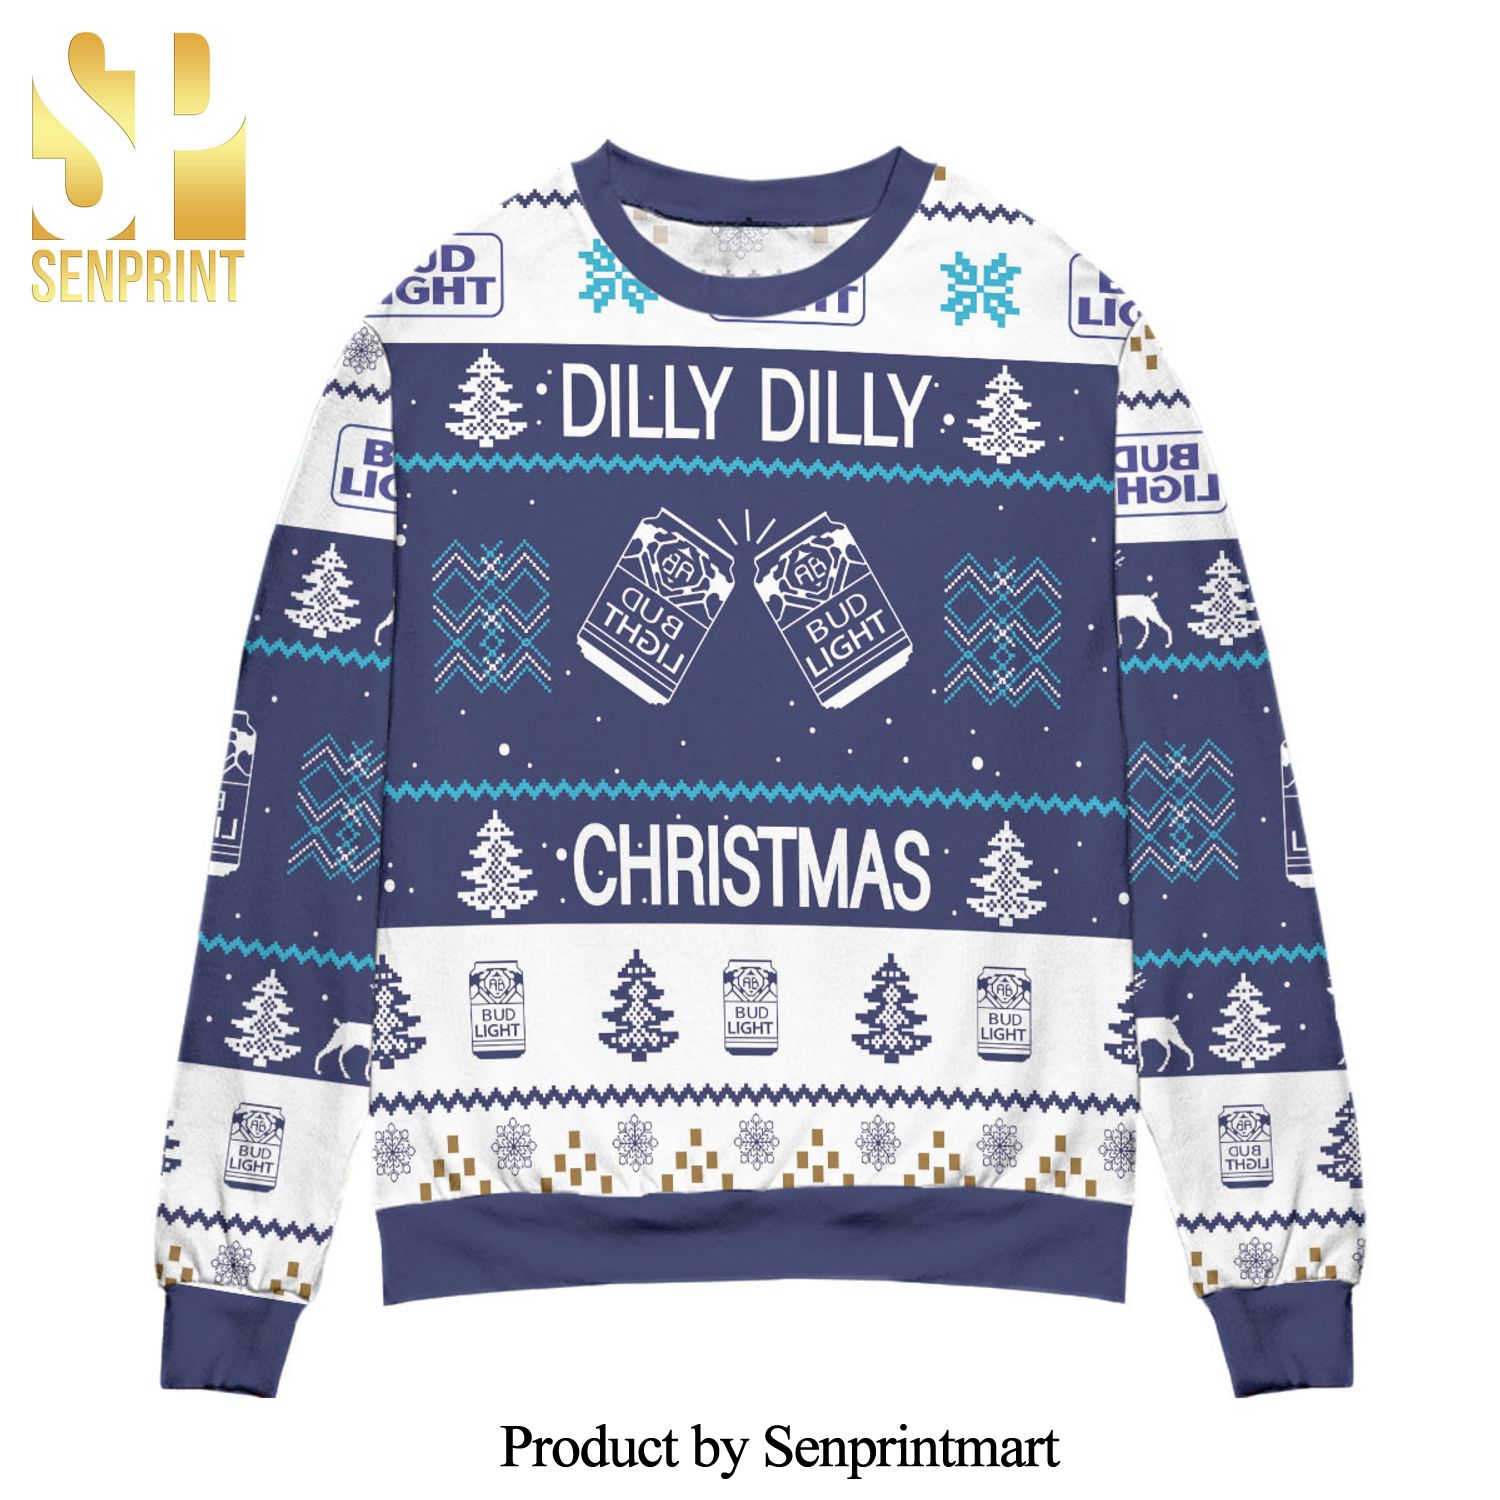 Bud Light Dilly Dilly Christmas Knitted Ugly Christmas Sweater